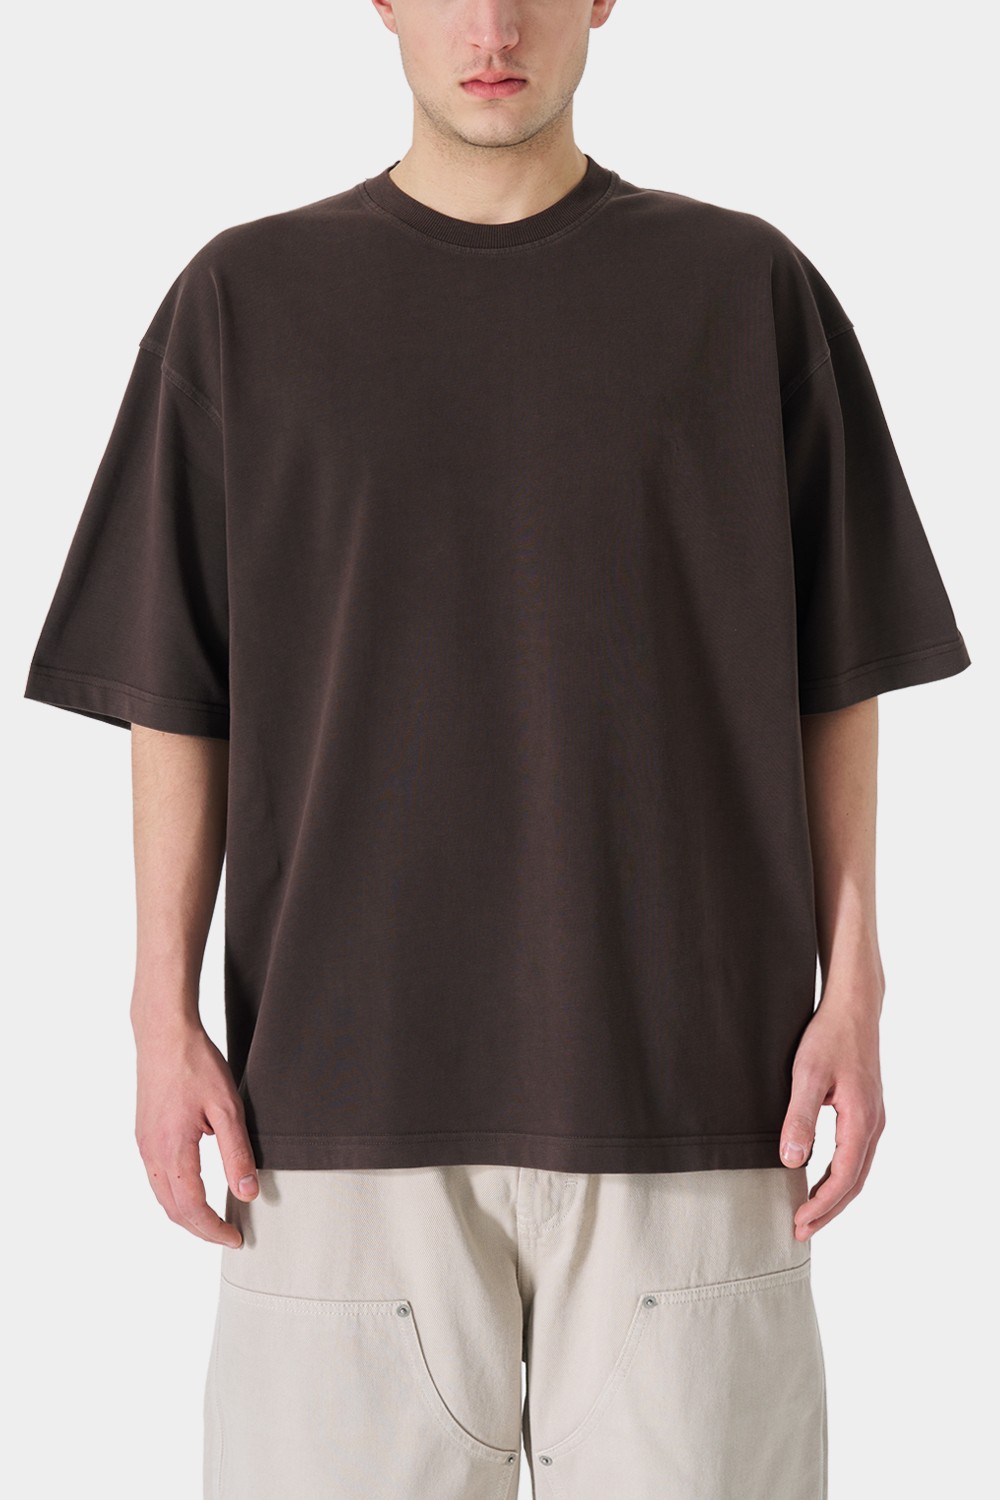 Sohigh Blank Oversized T-Shirt - Washed Brown